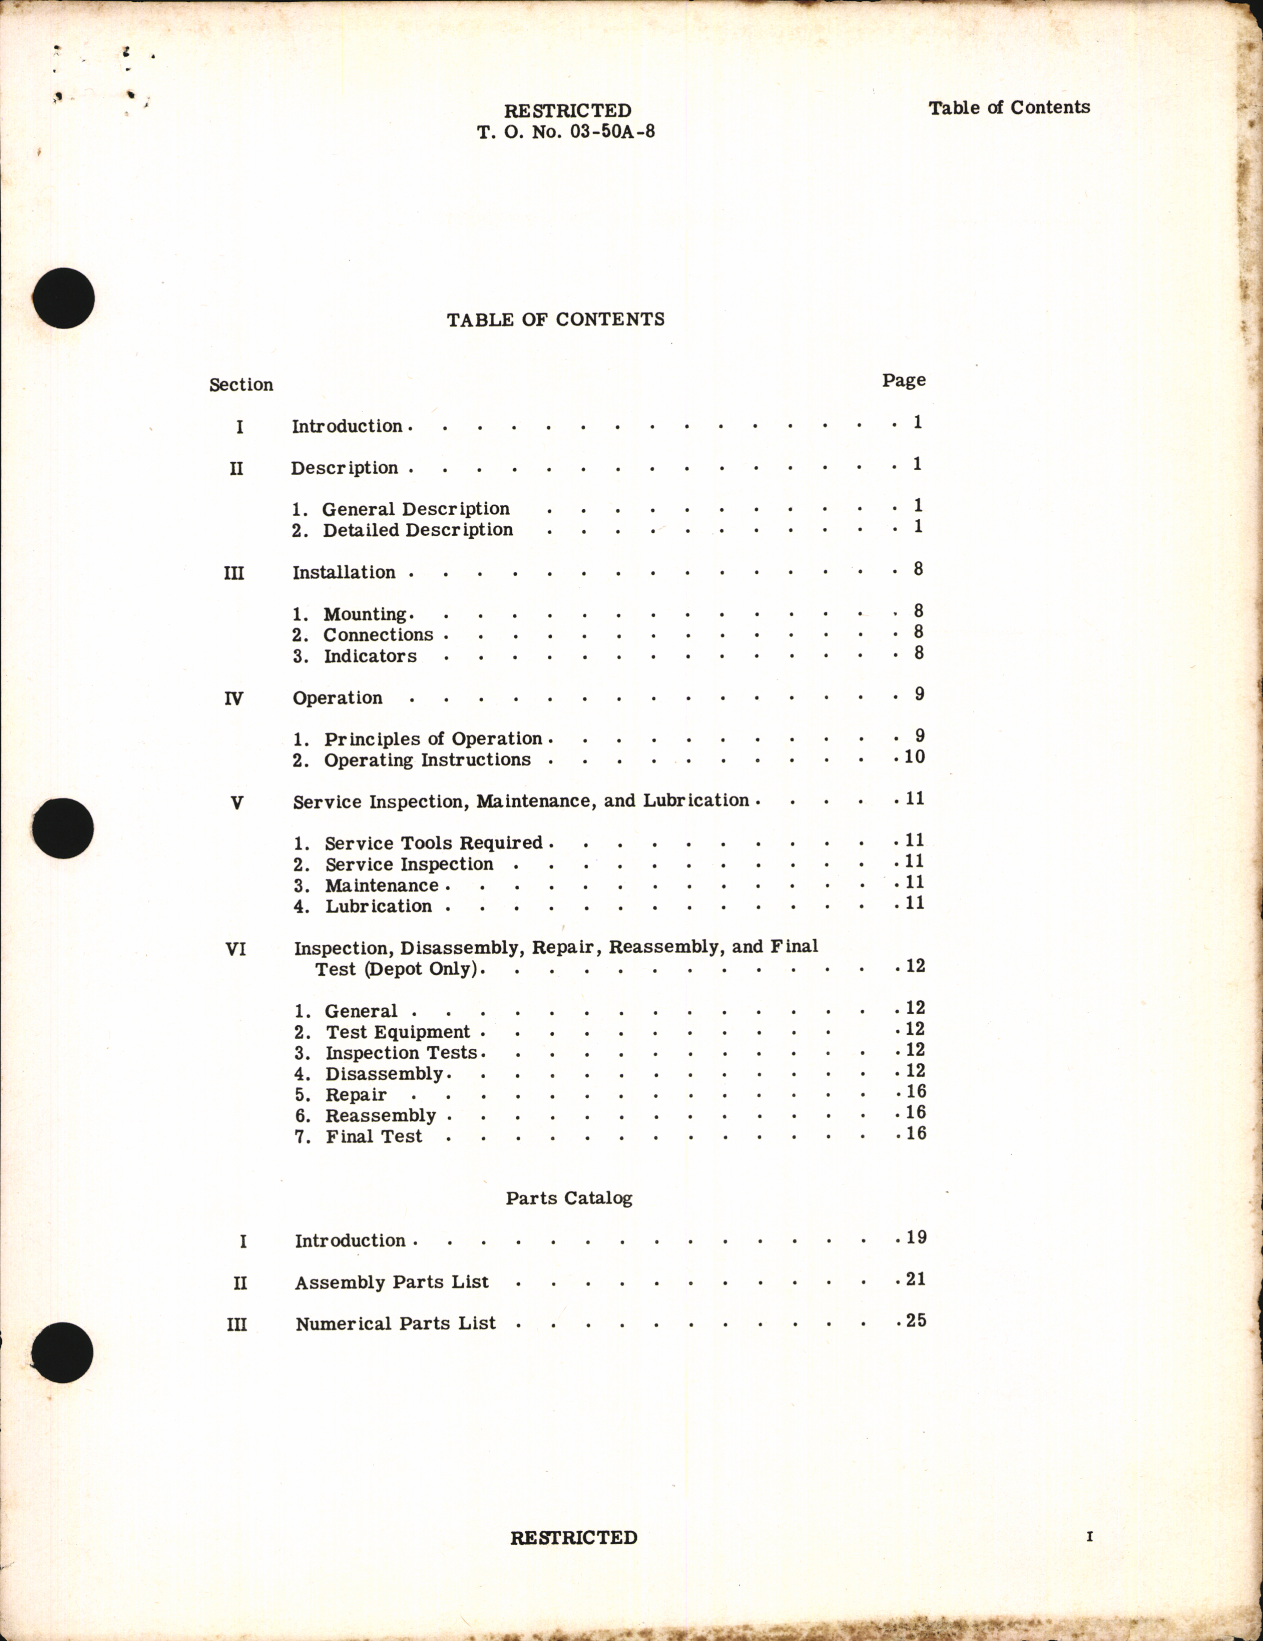 Sample page 3 from AirCorps Library document: Handbook of Instructions with Parts Catalog for Type A-12 Demand Oxygen Regulator